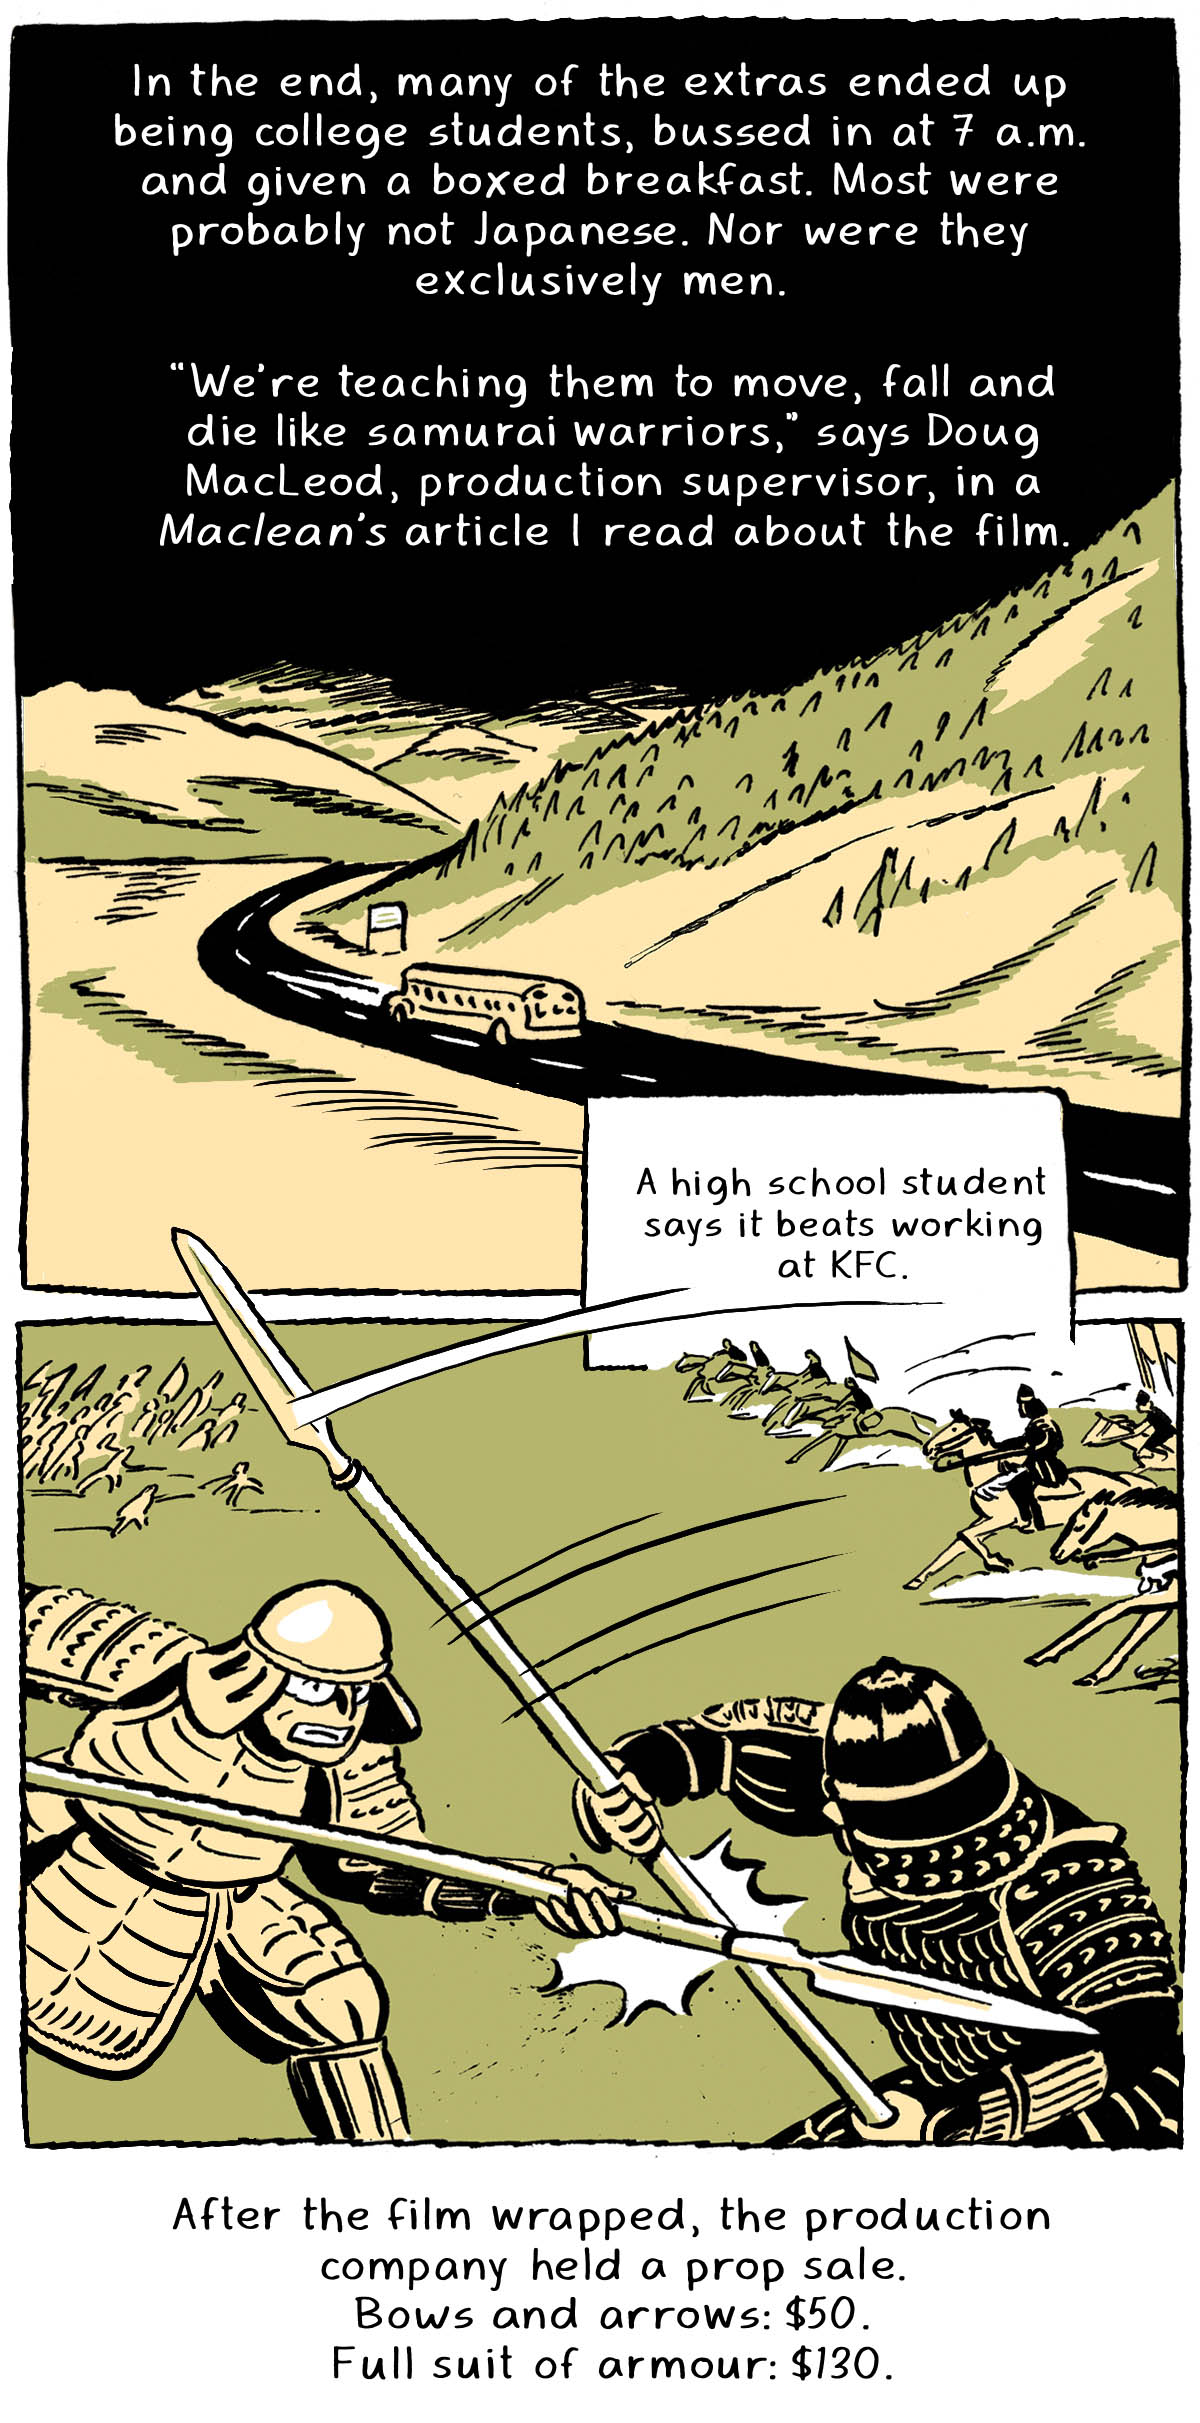 A school bus drives on a road winding through the mountains. “In the end, many of the extras ended up being college students, bussed in at 7 a.m. and given a boxed breakfast. Most were probably not Japanese. Nor were they exclusively men.” Two figures with swords clash, one in a light suit of armour and one dark, while opposing troops in the background rush towards each other. “'We’re teaching them to move, fall and die like samurai warriors,' says Doug MacLeod, production supervisor in a Maclean’s article I read about the film. A high school student says it beats working at KFC.” “After the film wrapped, the production company held a prop sale. Bows and arrows: $50. Full suit of armour: $130.”